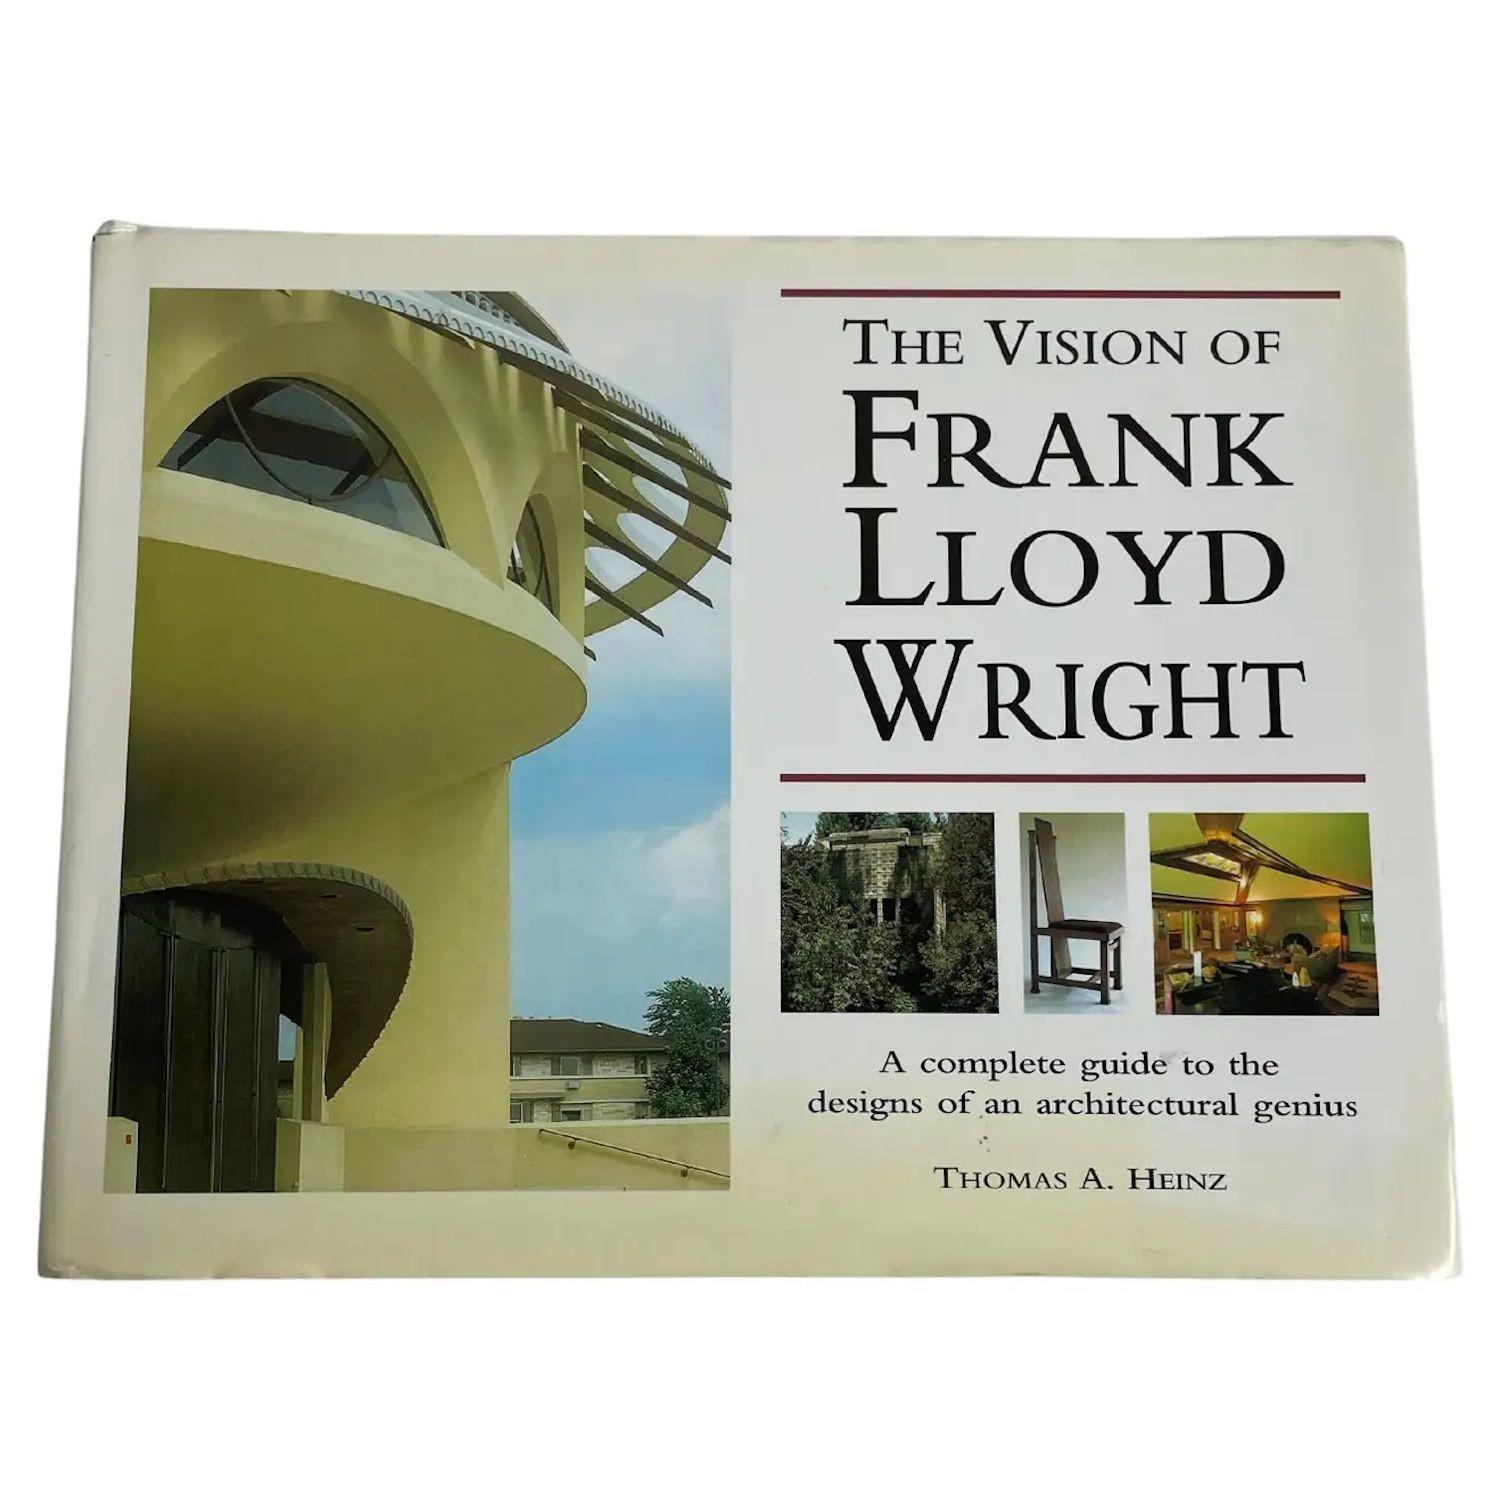 The Vision of Frank Lloyd Wright. by Thomas A. Heinz large heavy hardcover coffee table book. A Complete Guide To The Designs Of An Architectural Genius. Frank Lloyd Wright's career, sometimes tragic, sometimes tempestuous - at all times creative -